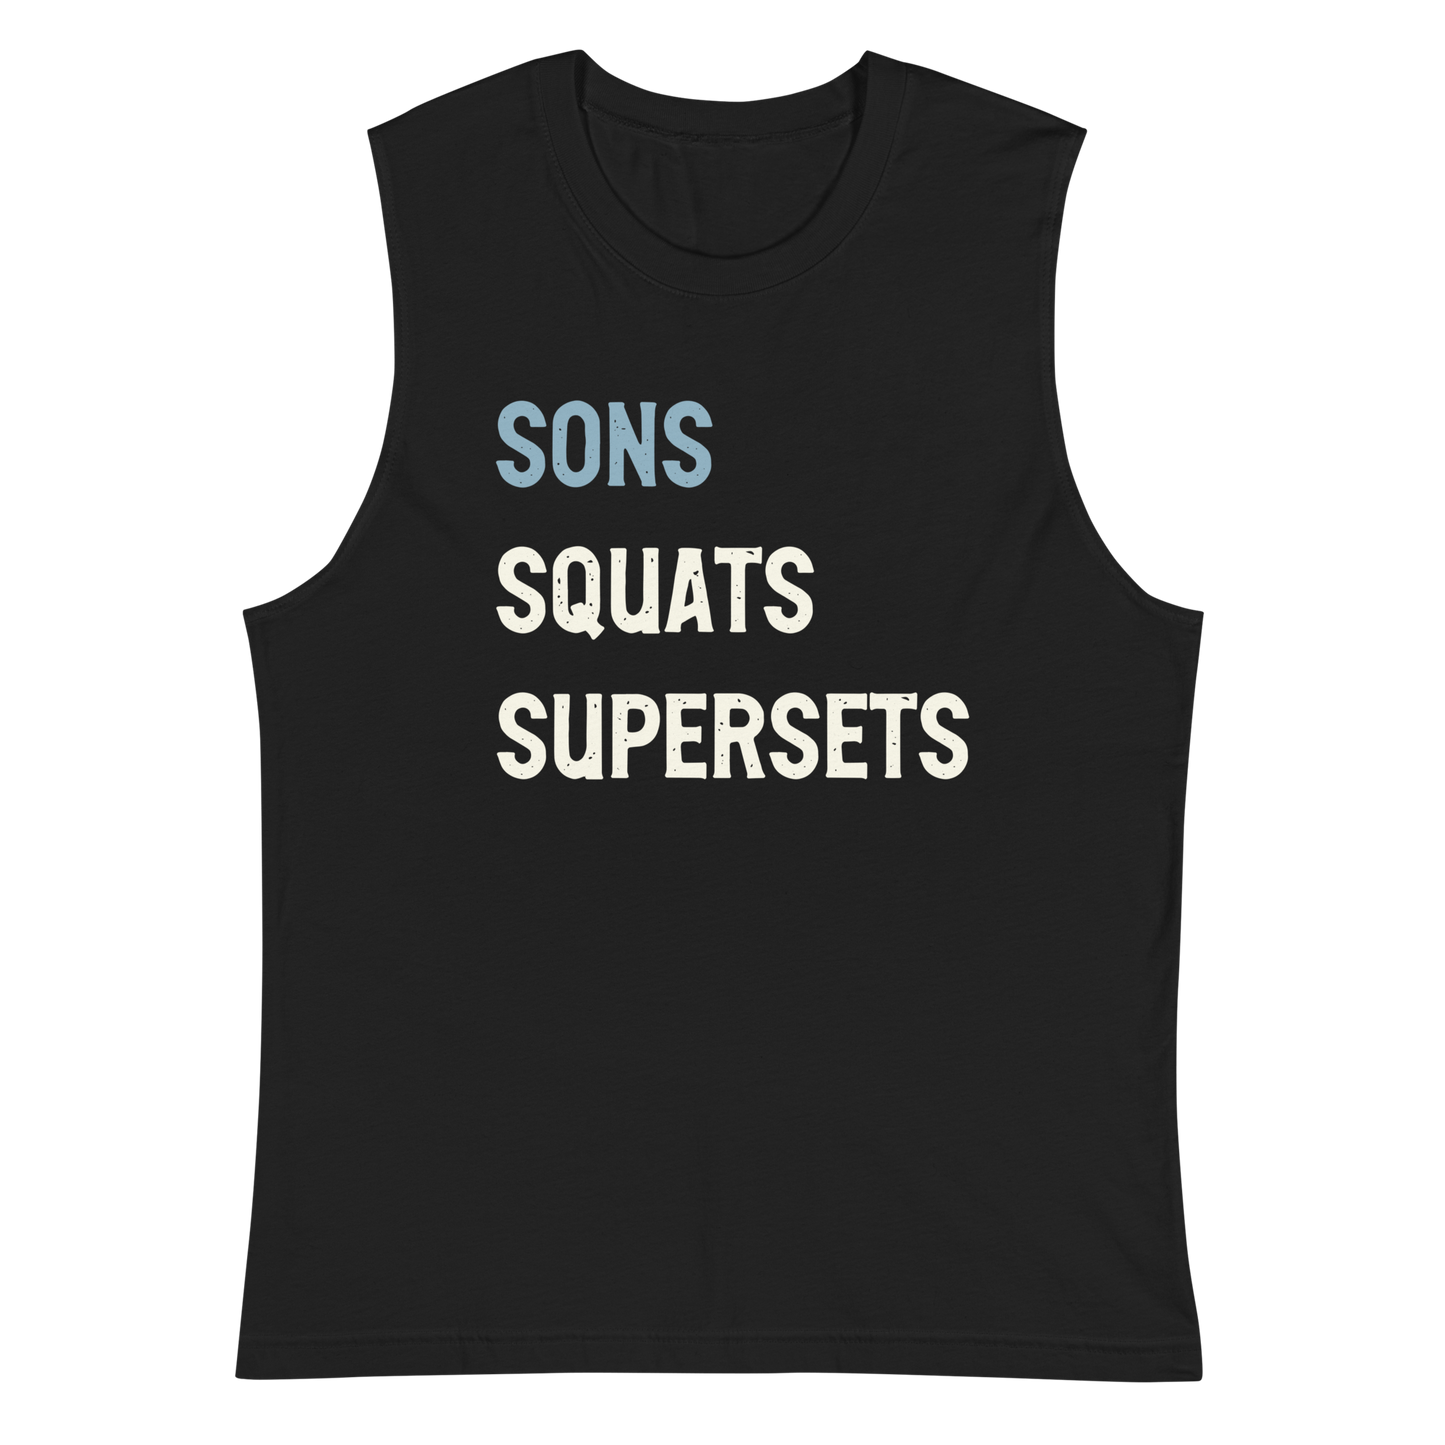 Son, Squats, and Supersets